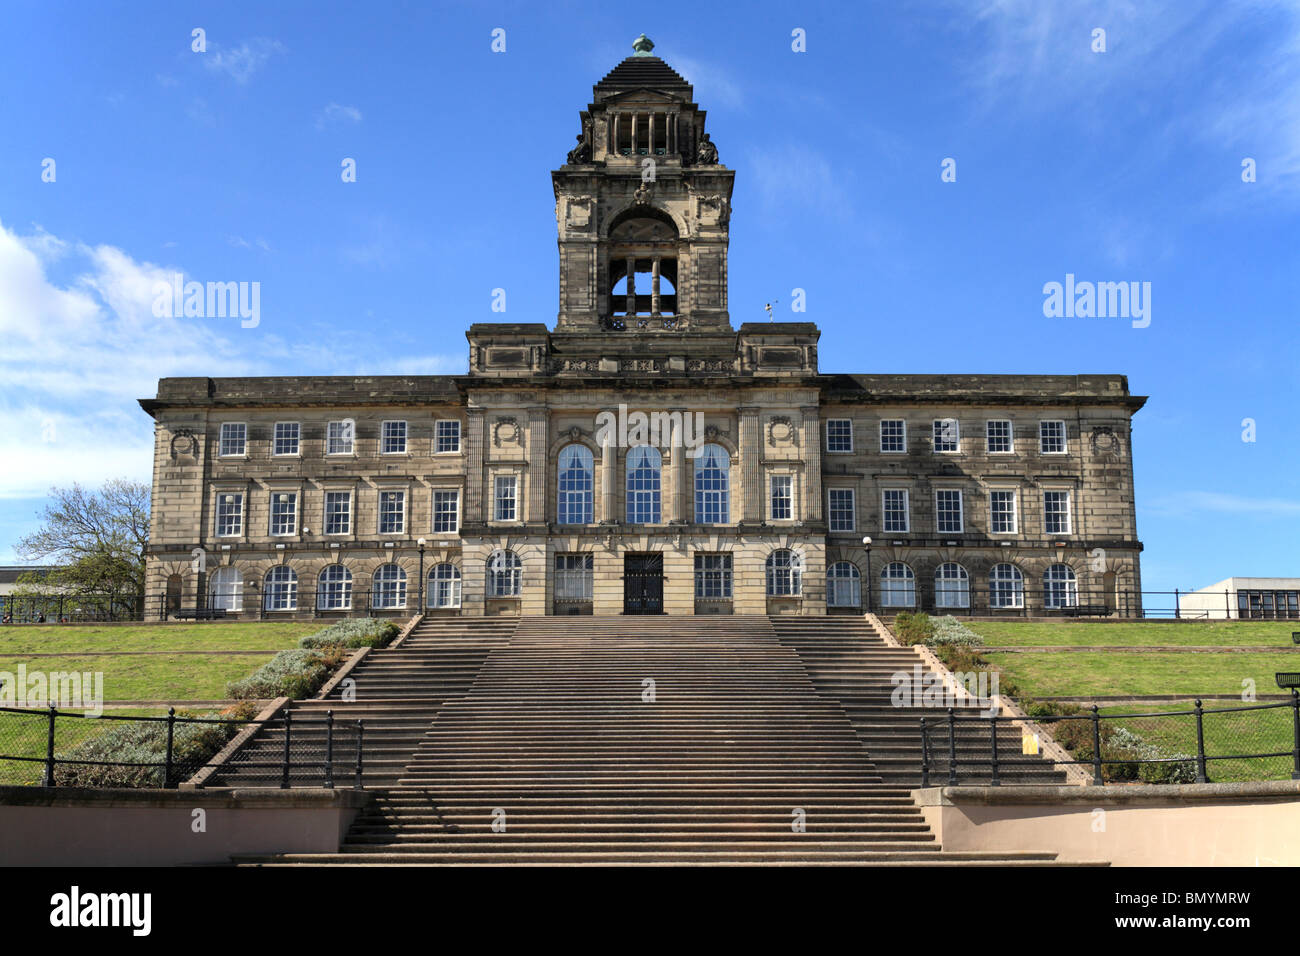 Wallasey Town Hall, Wirral Merseyside. Au bord de la rivière Mersey, Liverpool, Angleterre, Royaume-Uni Banque D'Images